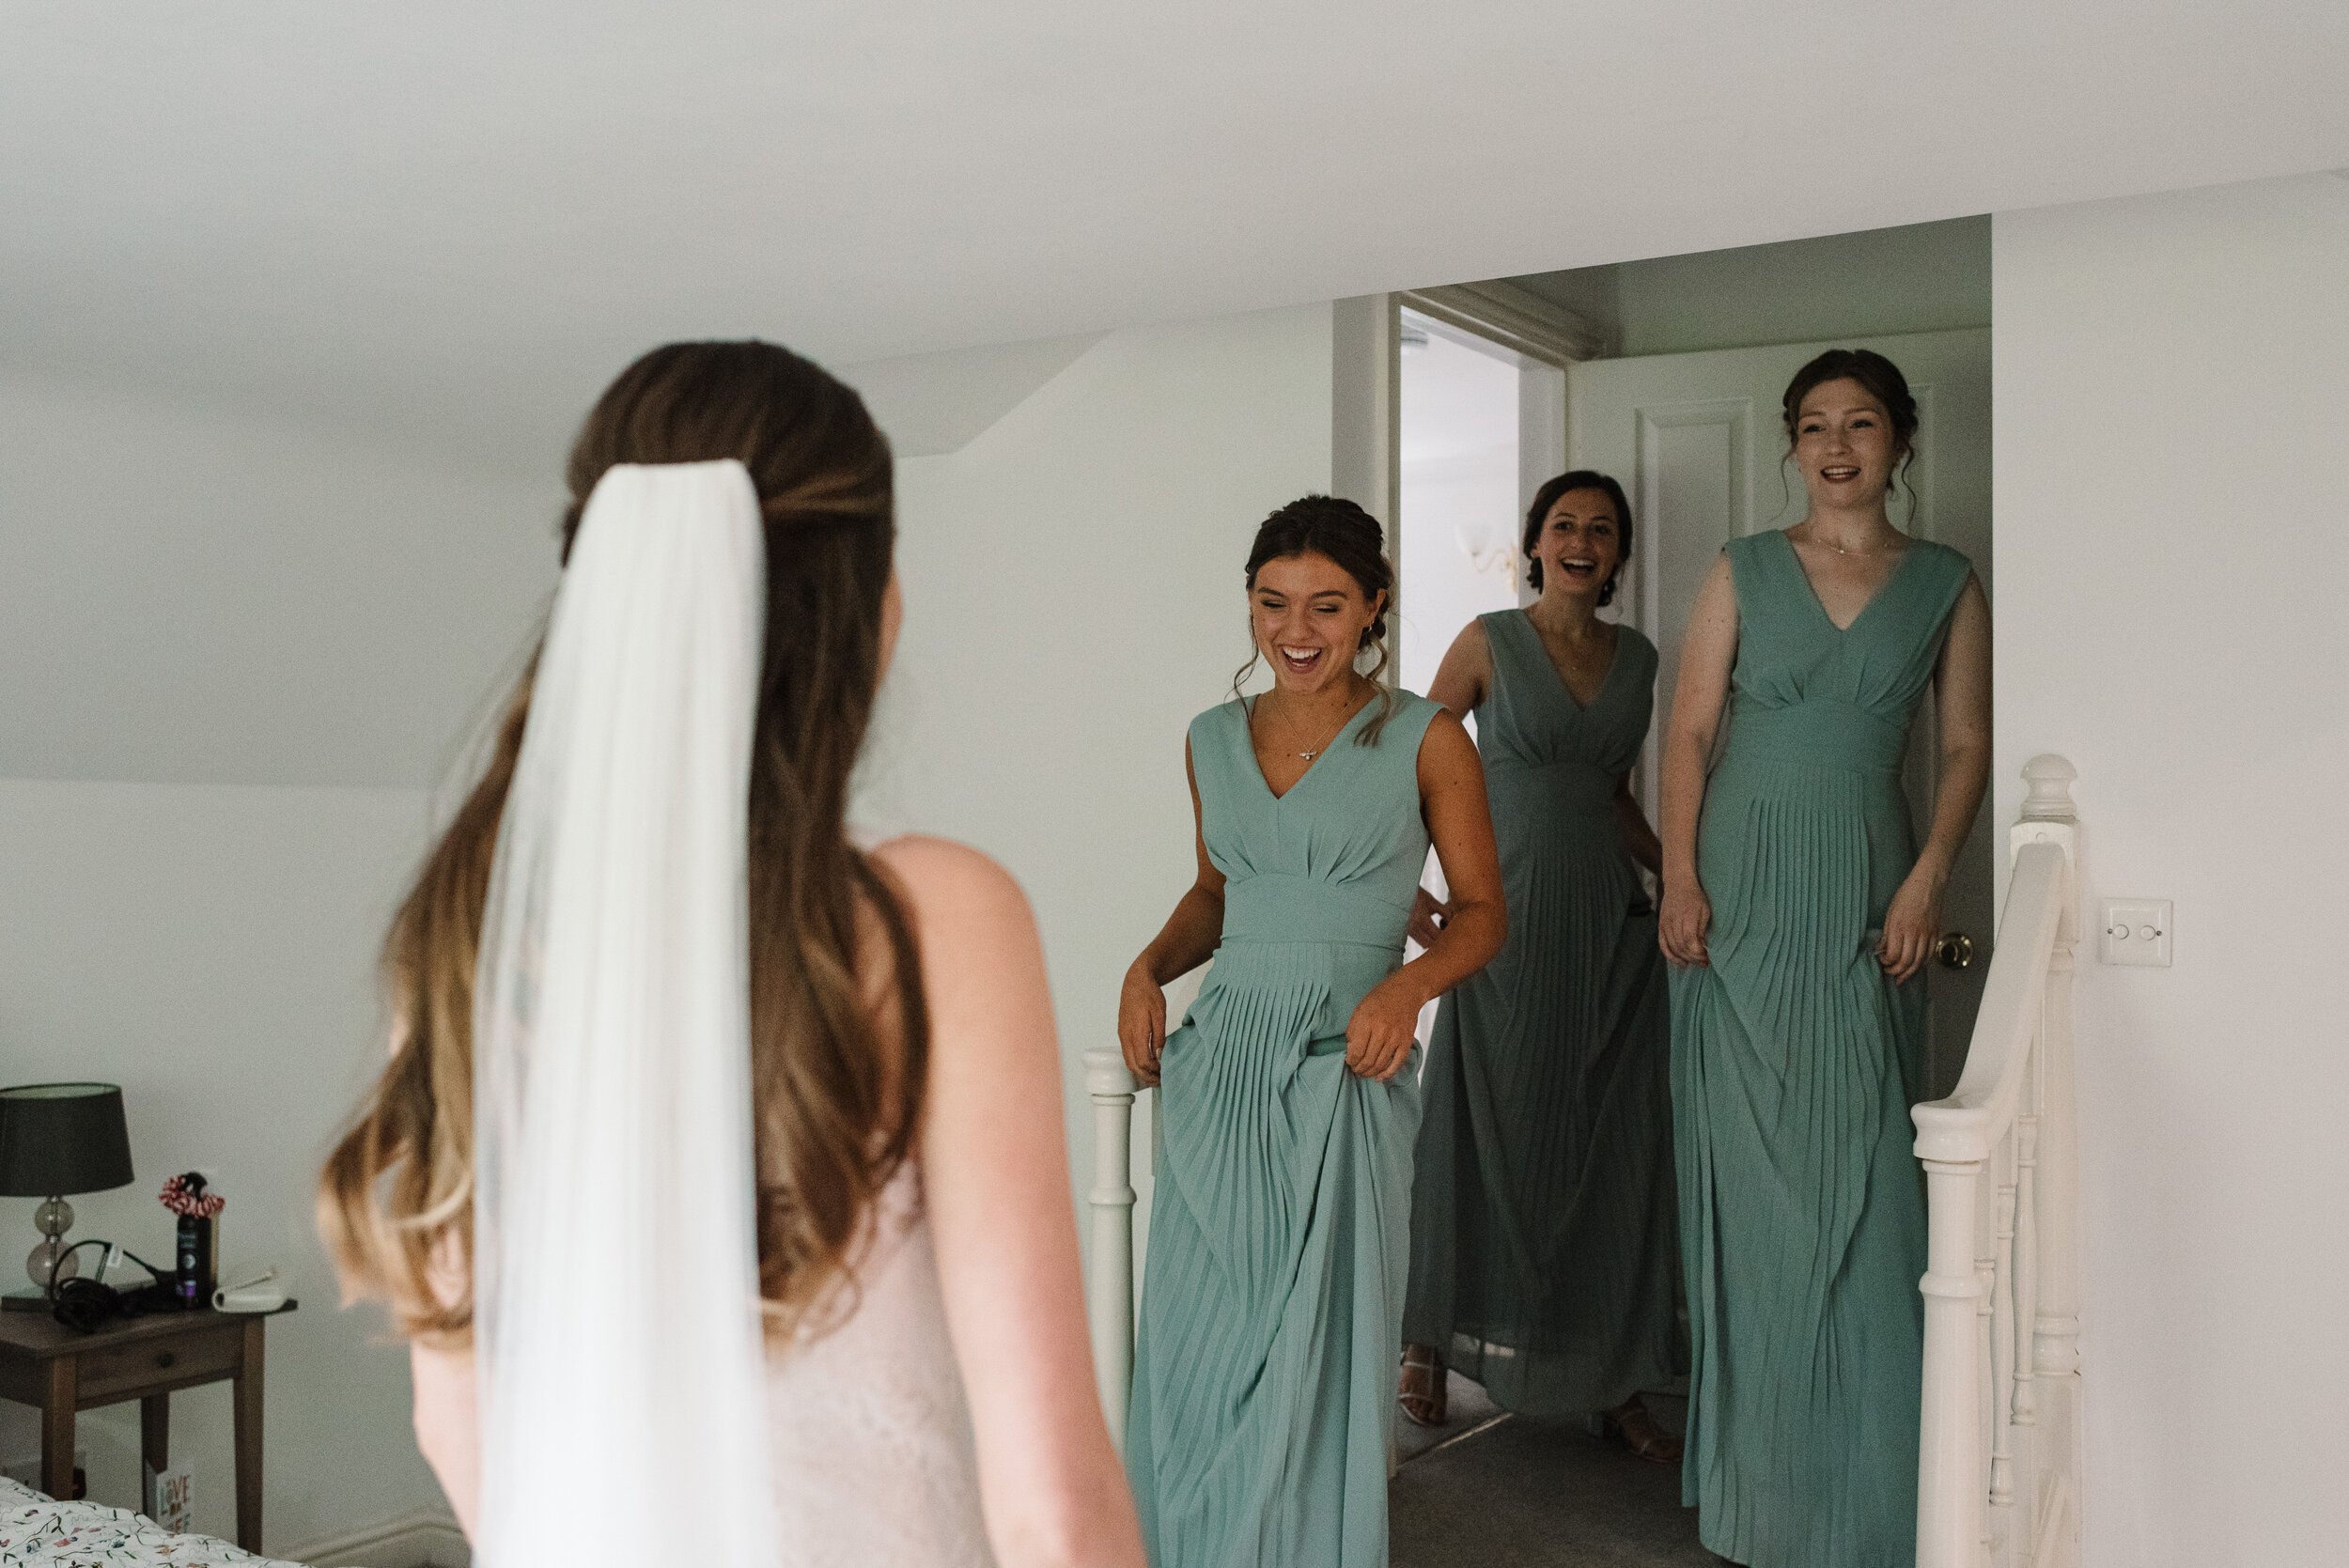 Three bridesmaids seeing their friend in her bridal outfit and smiling